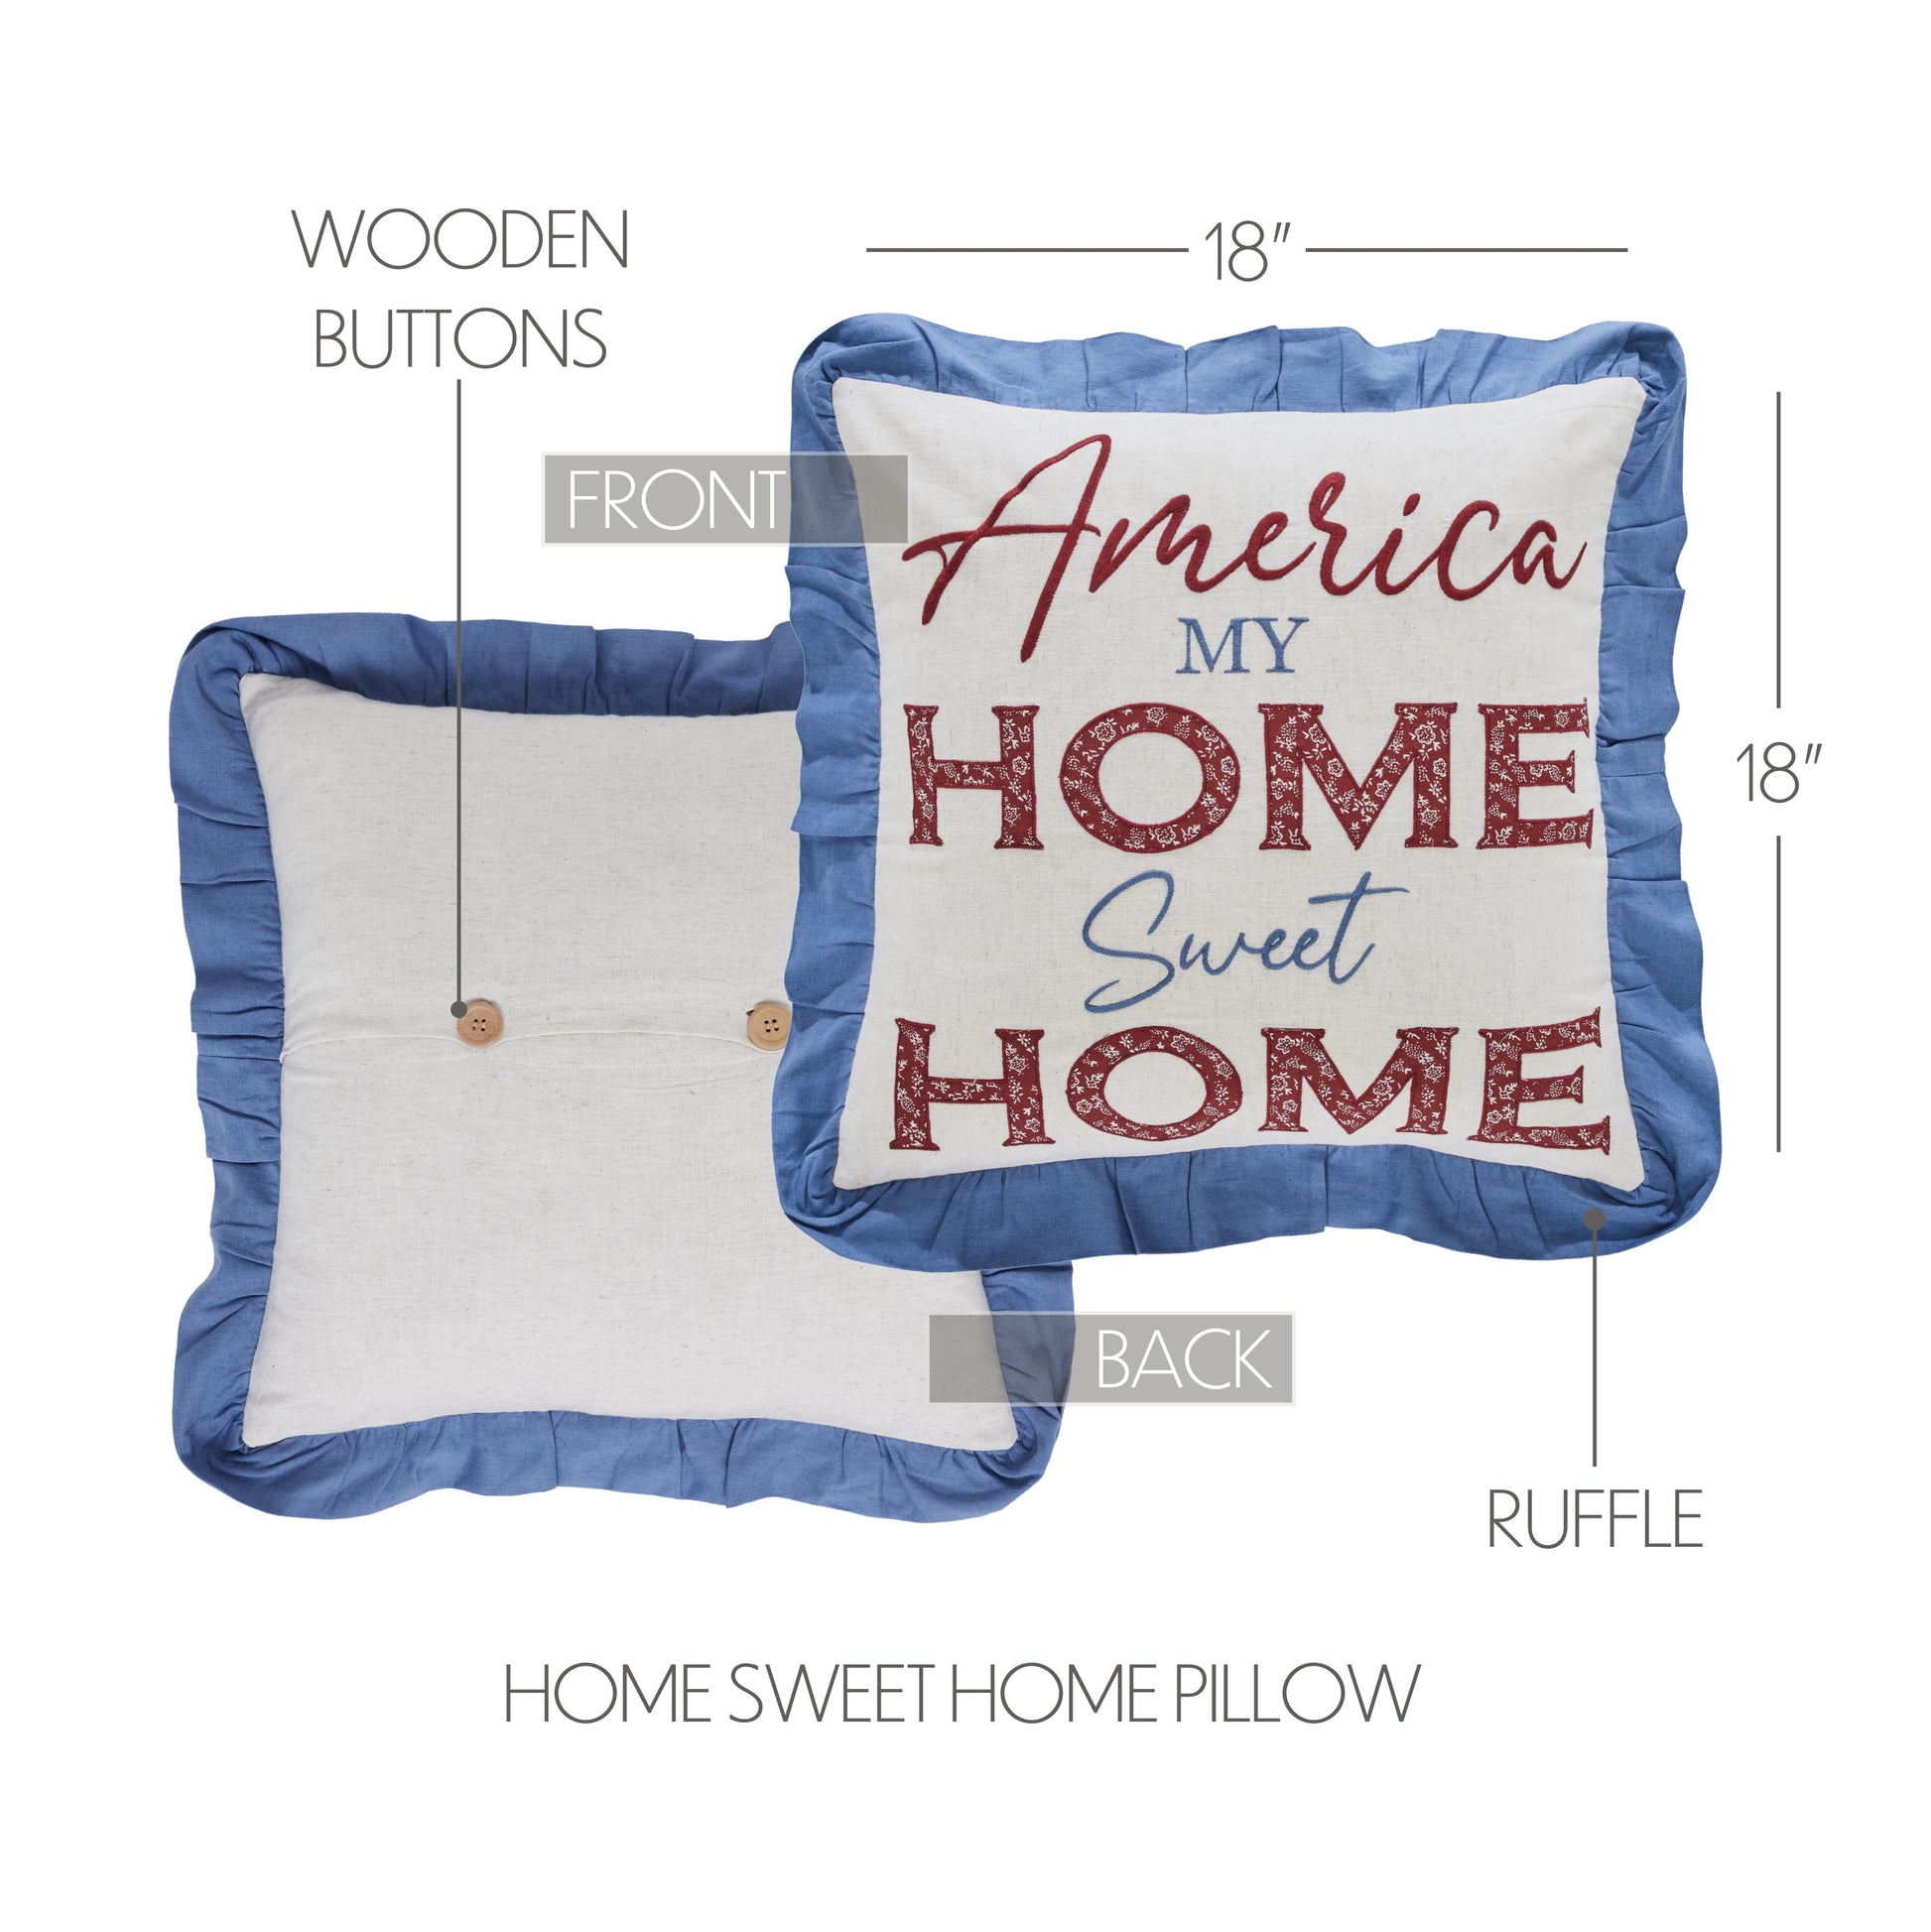 81178-Celebration-Home-Sweet-Home-Pillow-18x18-image-1